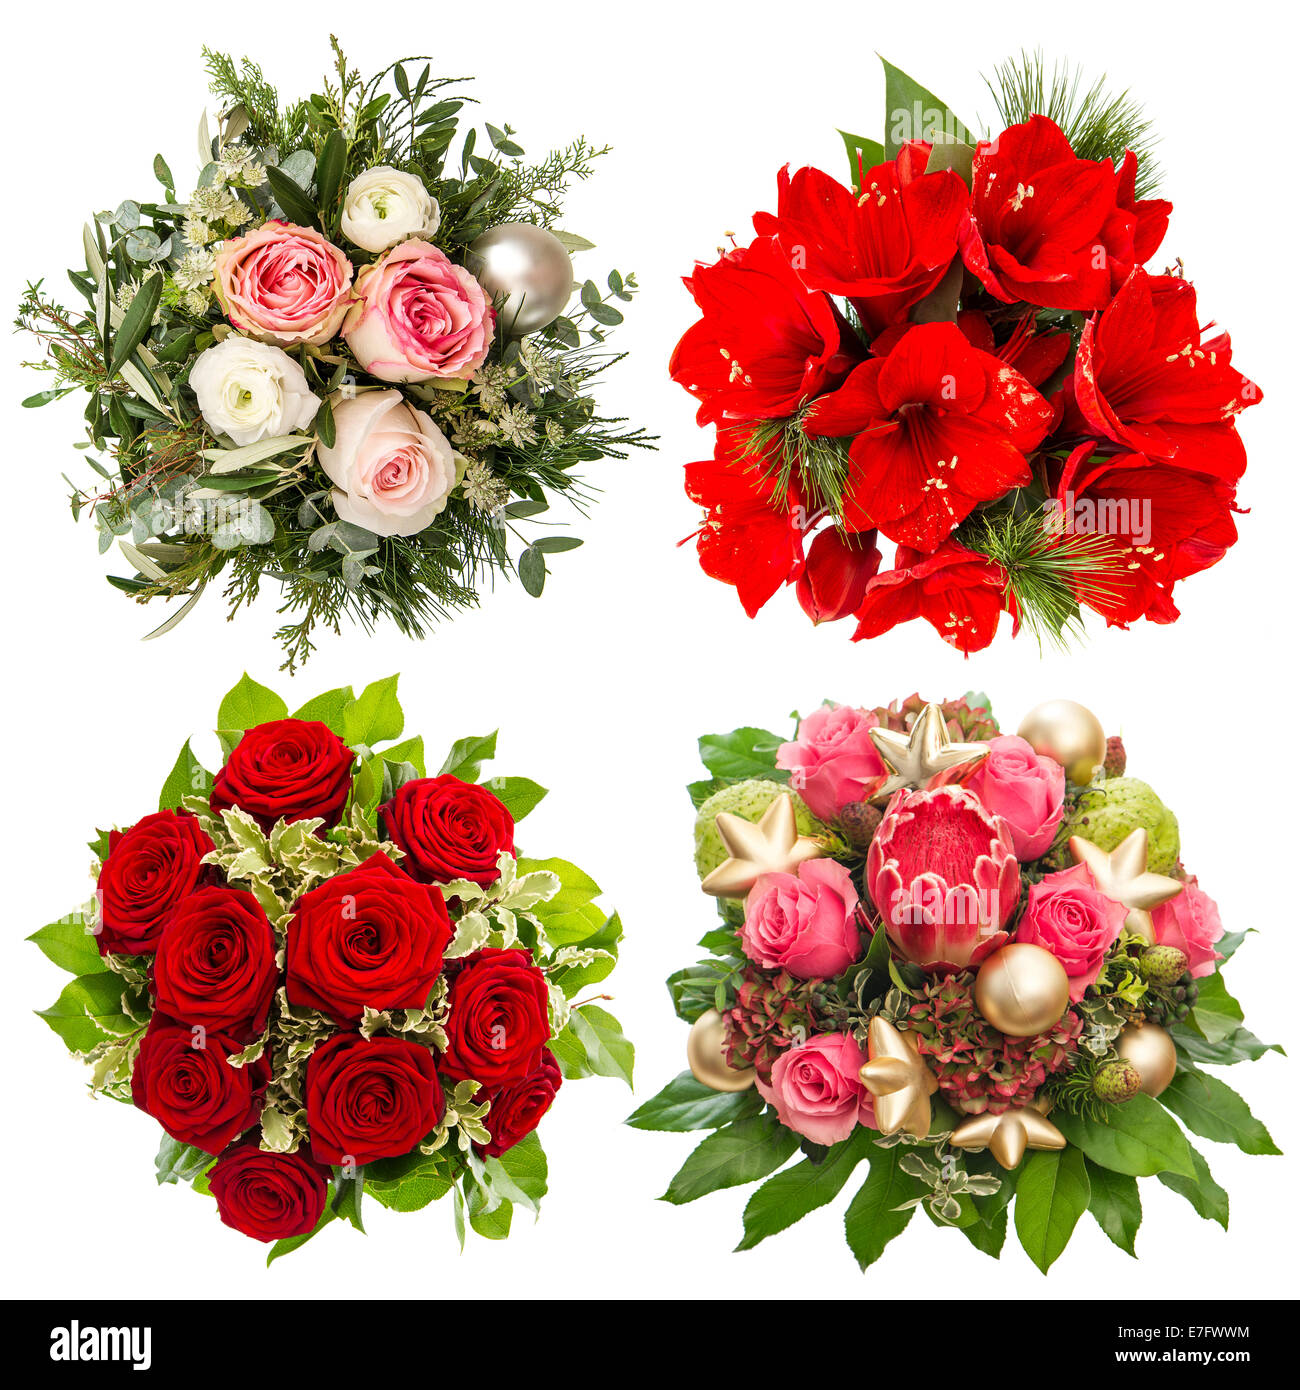 Four colorful flowers bouquet for Christmas and New Year holidays. Roses, amaryllis, protea isolated on white background Stock Photo